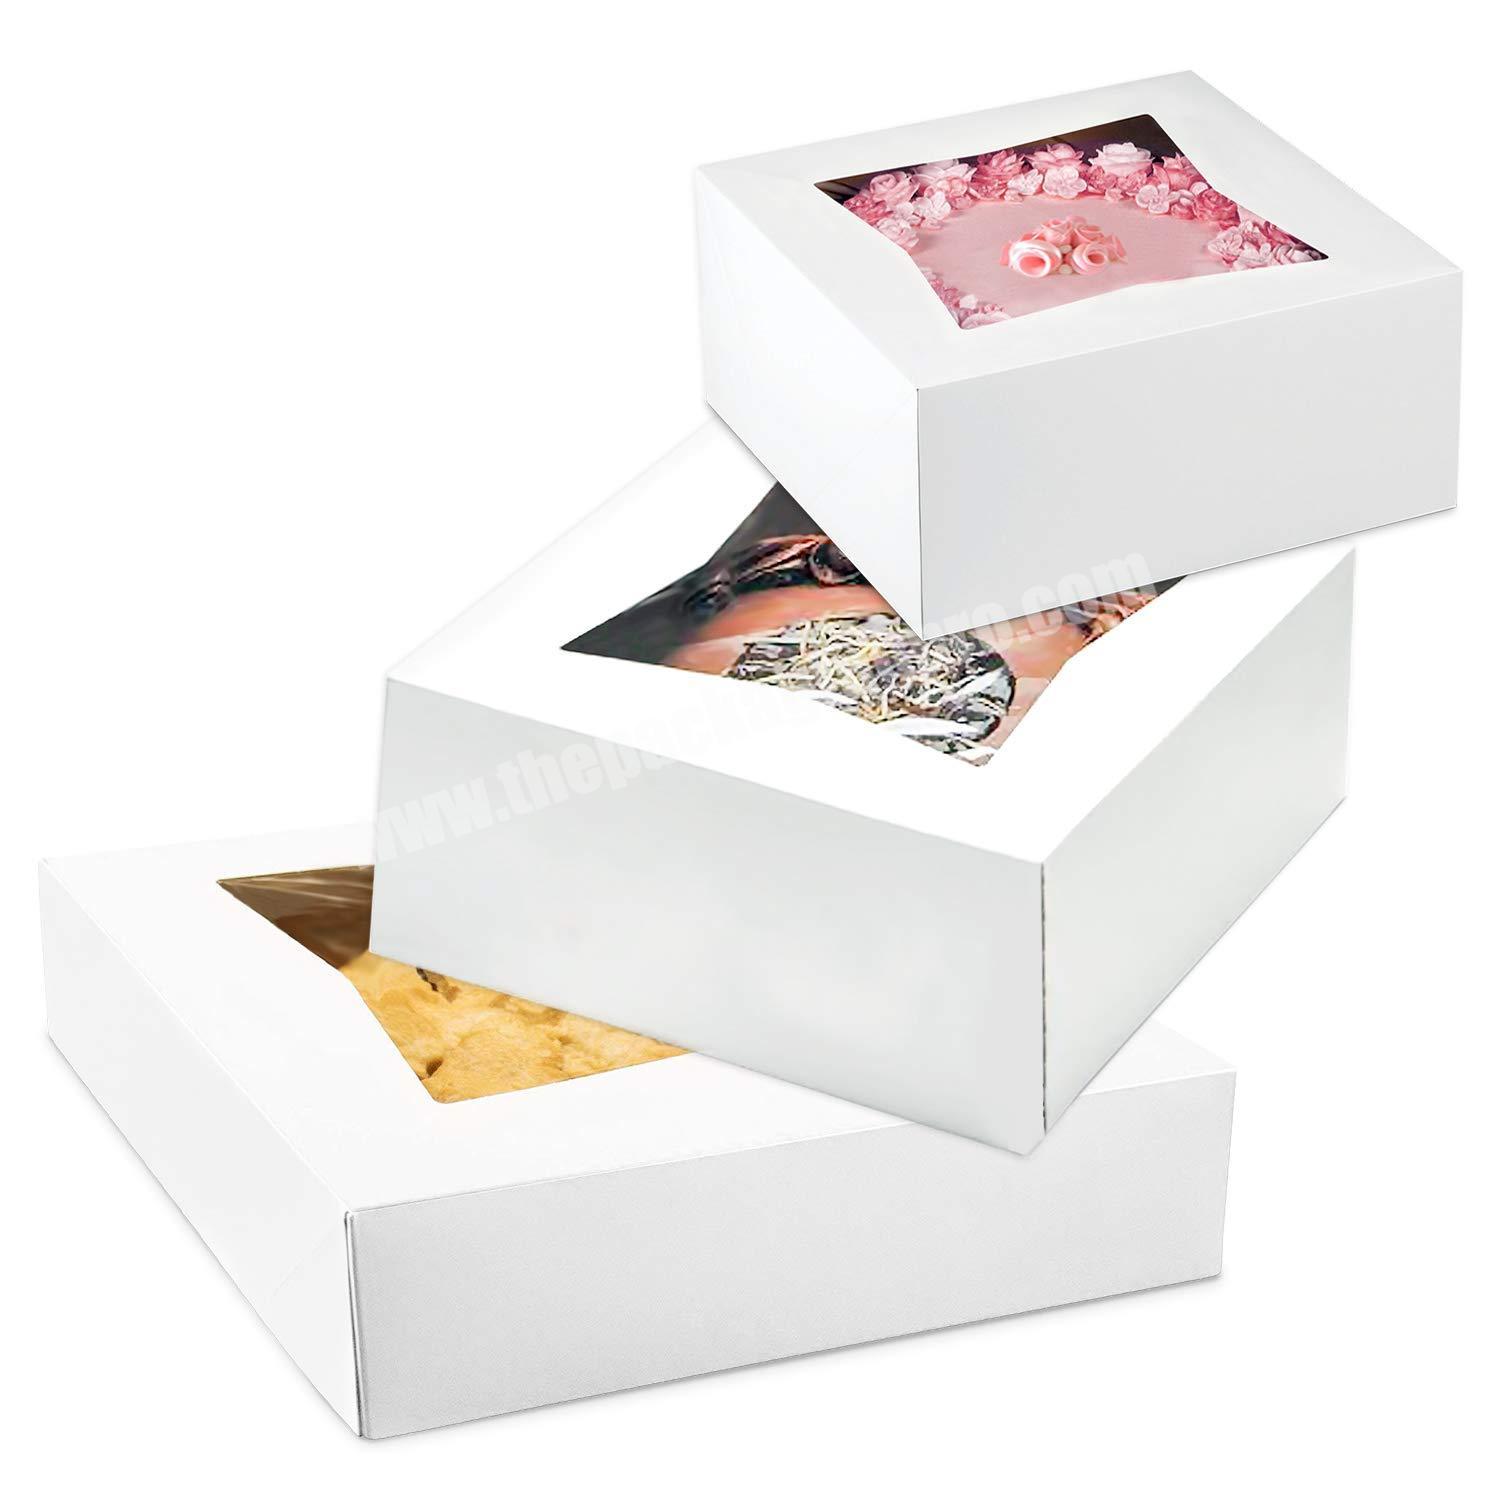 With Window 6 and 8 and 10 inch White Cardboard Gift Packaging for Pie, Cupcake, Cookies and Pastry Bakery Cake Box